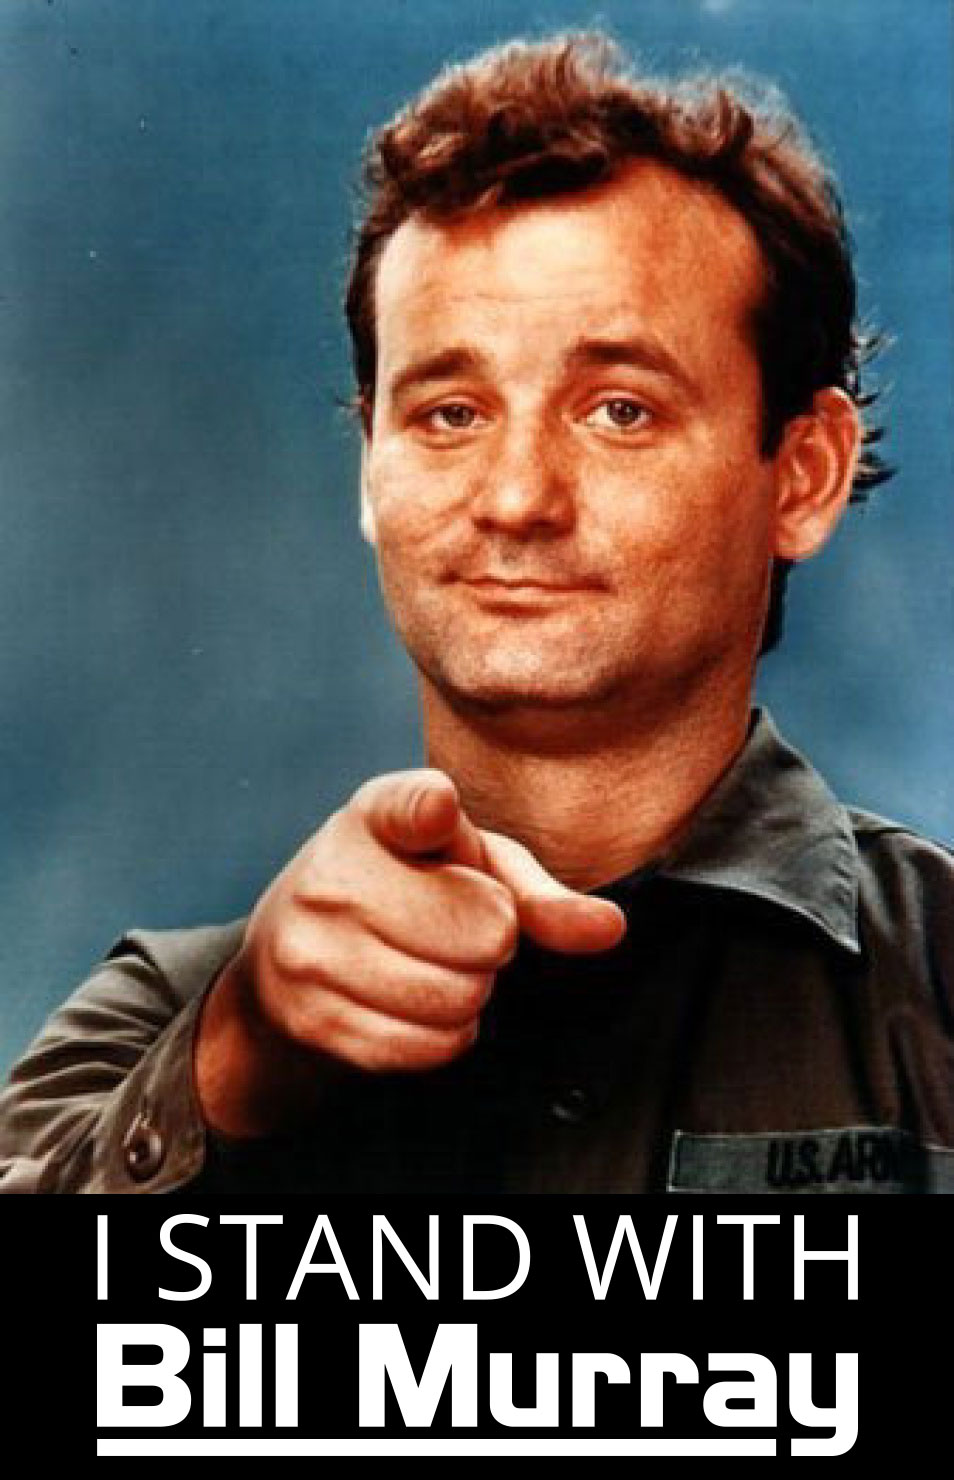 Vote for Bill Murray